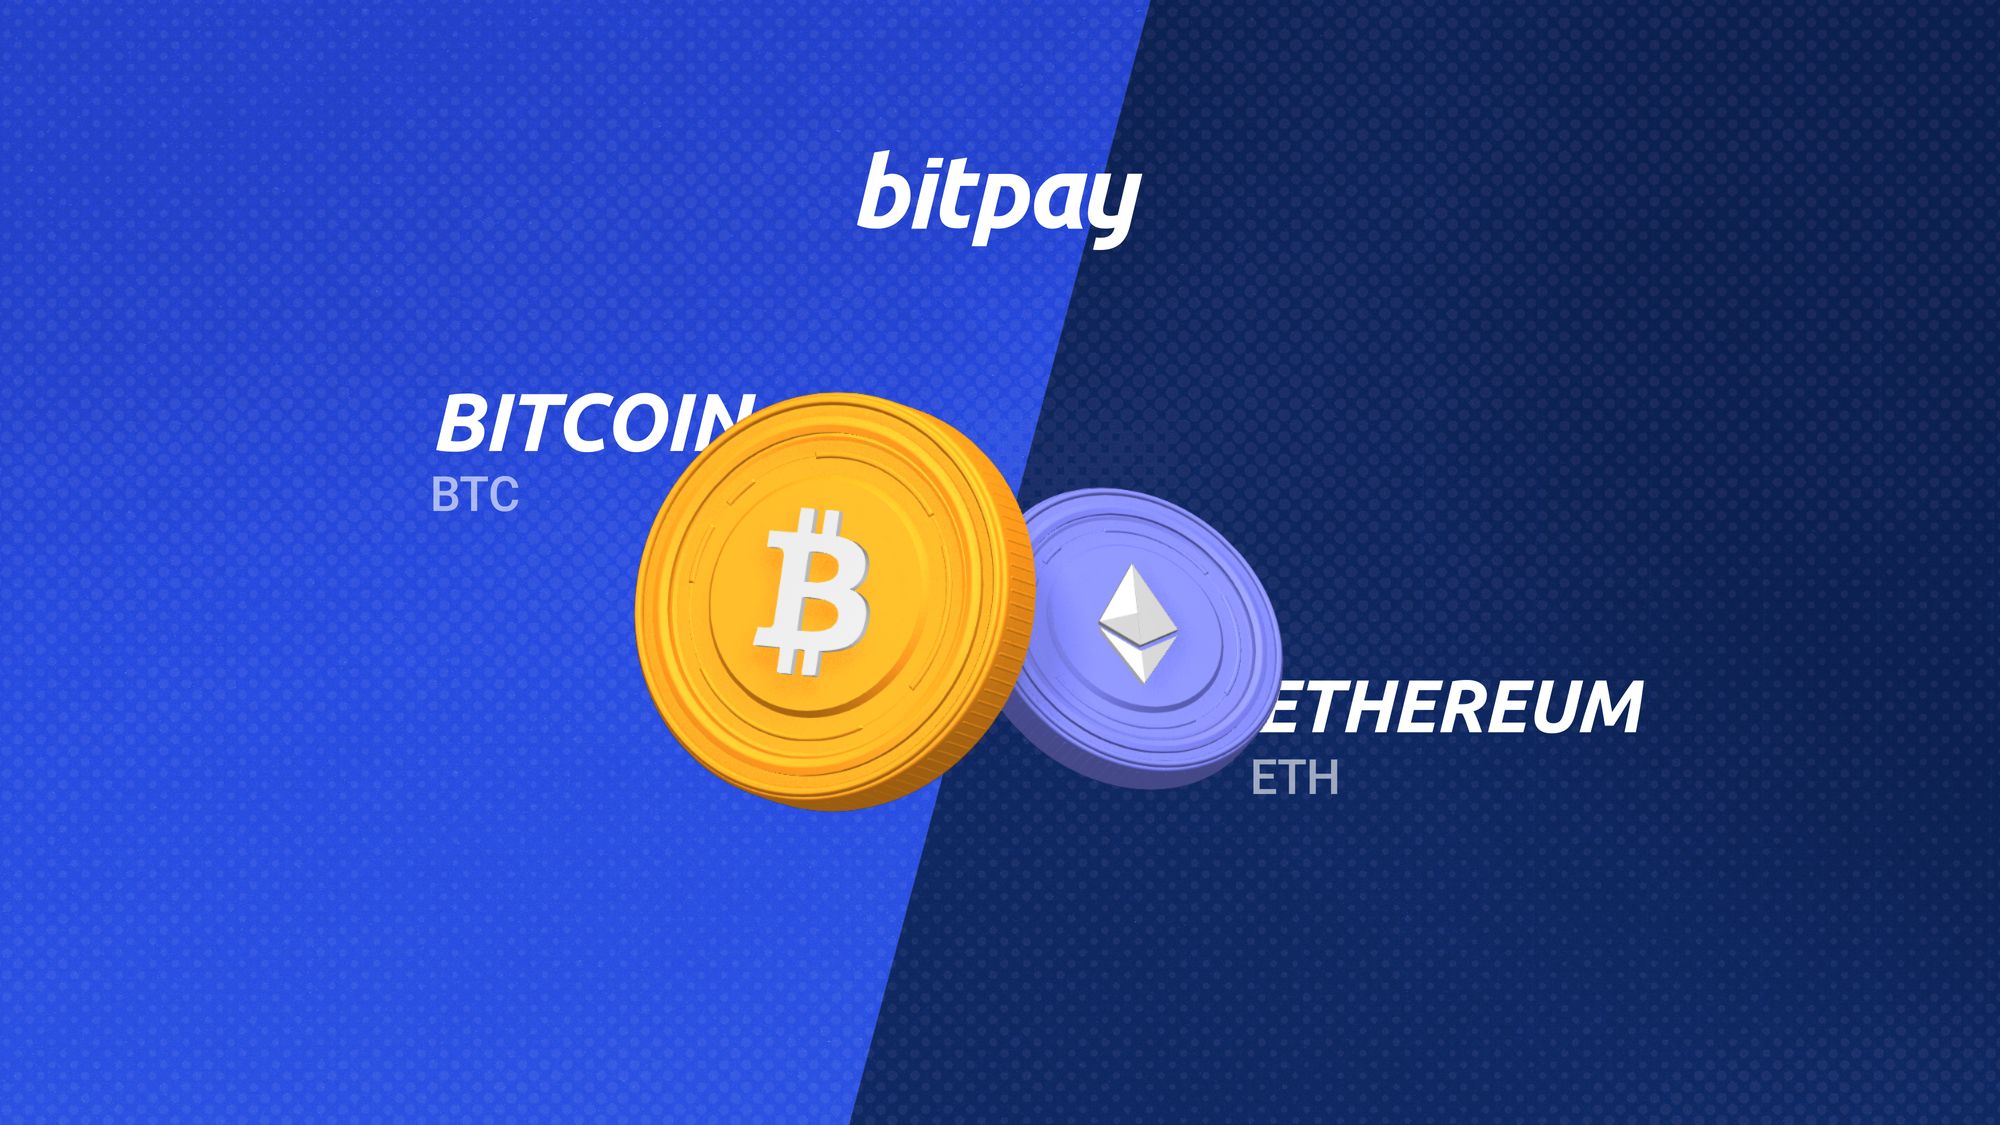 Bitcoin vs Ethereum: What Are the Differences as a Technology, Investment and Payment Method?